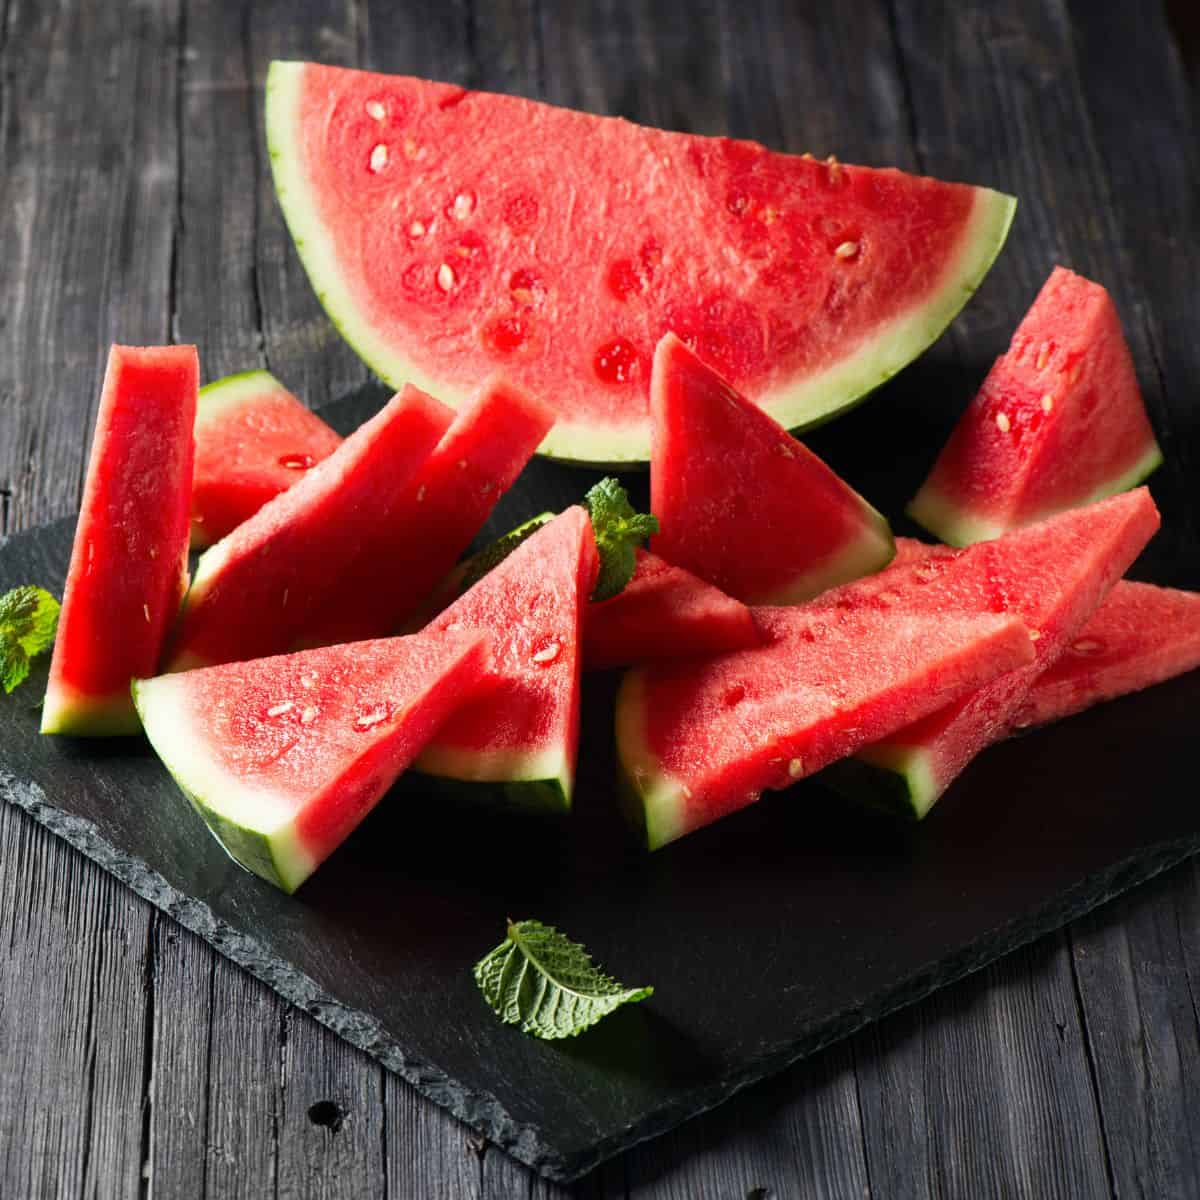 Watermelon slices on a wooden board.